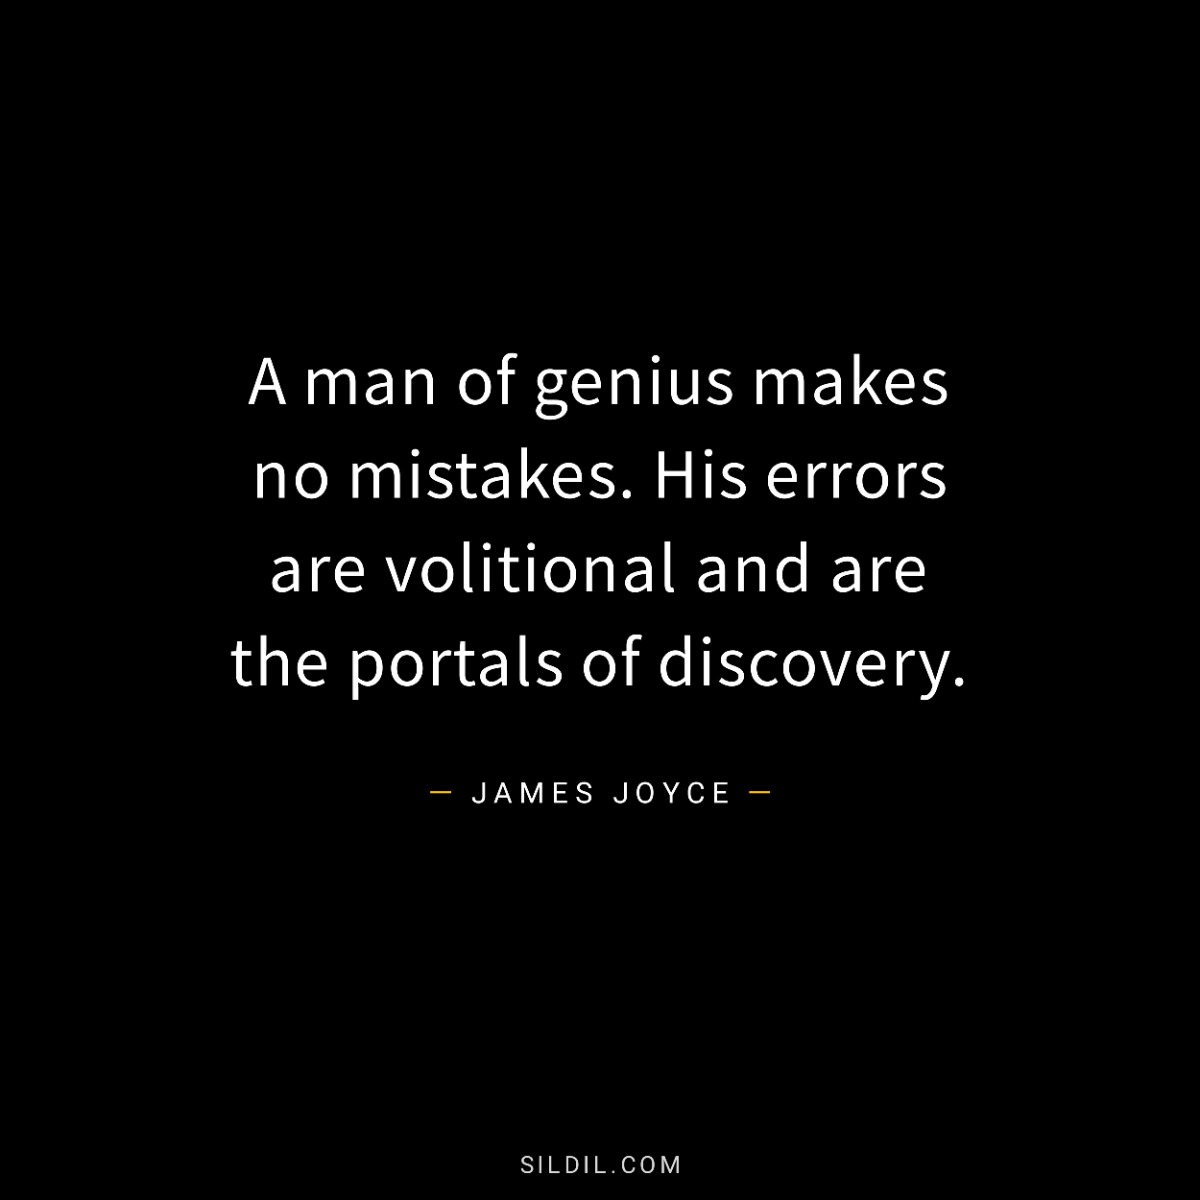 A man of genius makes no mistakes. His errors are volitional and are the portals of discovery.